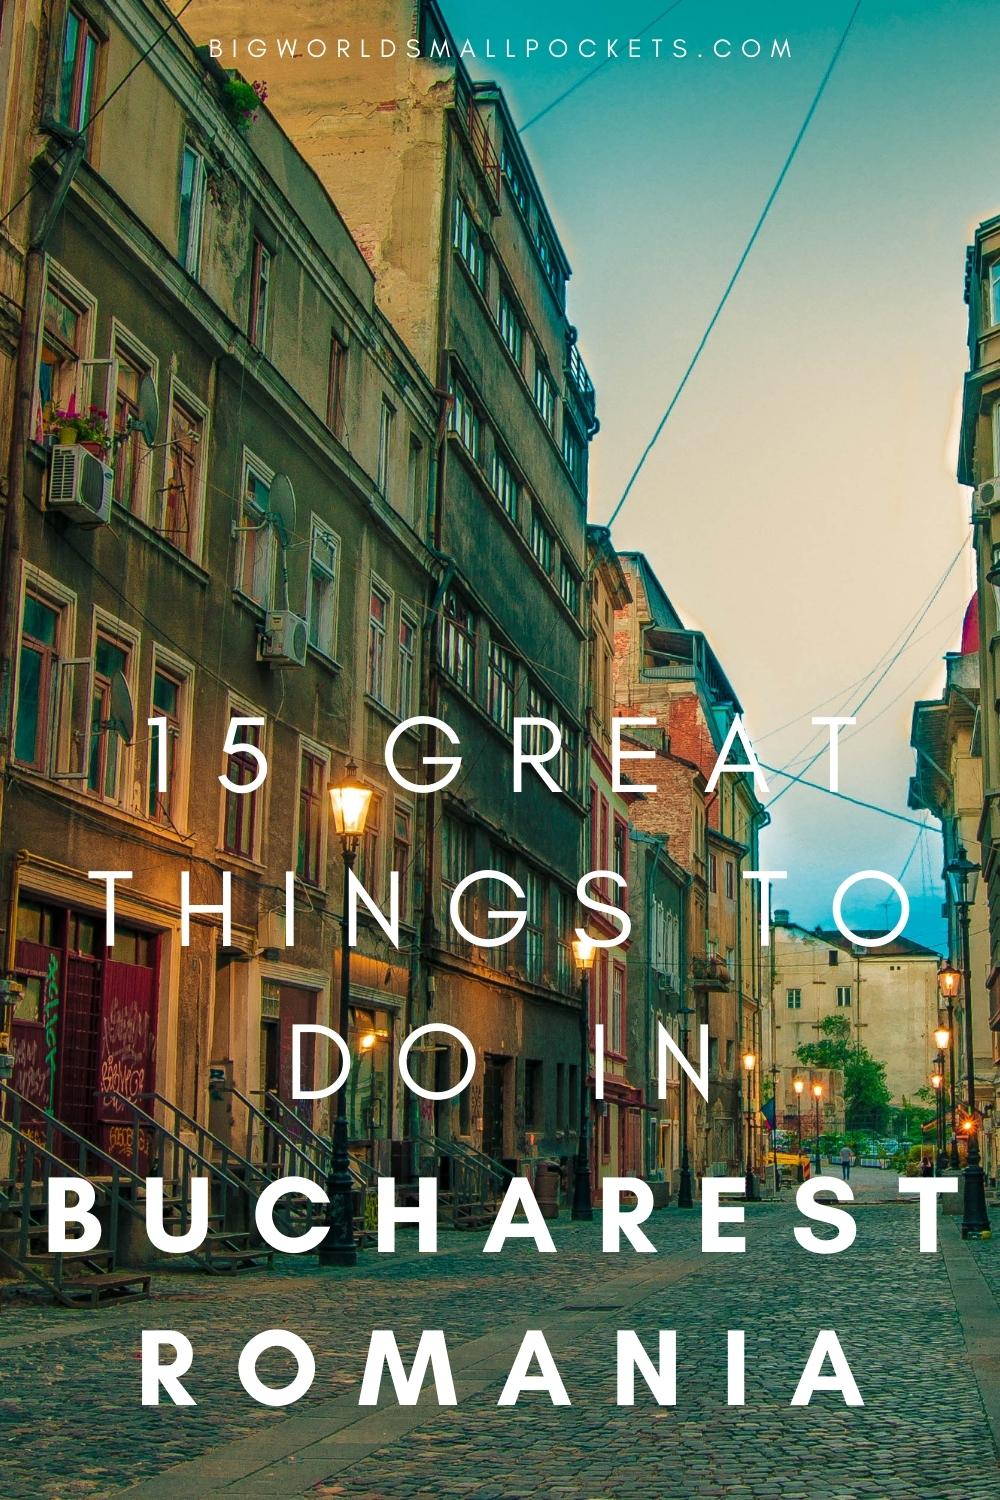 15 Great Things To Do in Bucharest, Romania